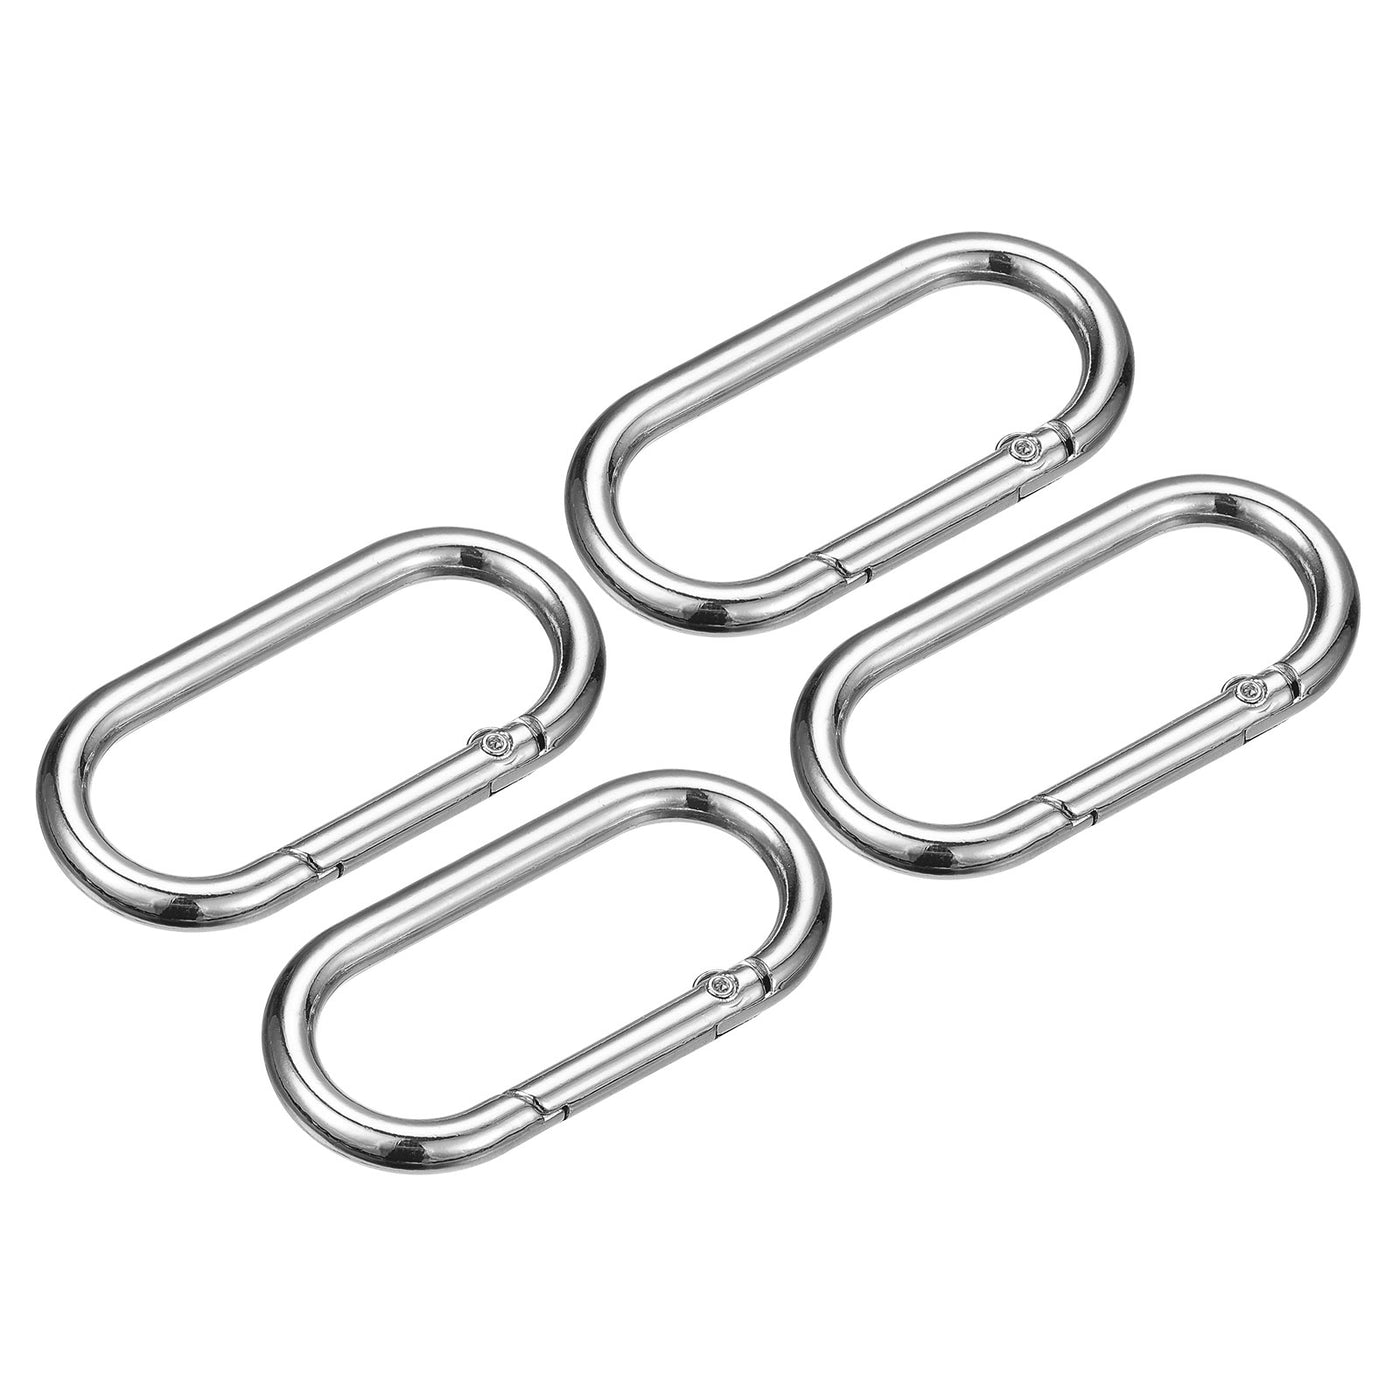 uxcell Uxcell 1.93" Spring Oval Ring Snap Clip Trigger for Bag Purse Keychain, 4Pcs Silver